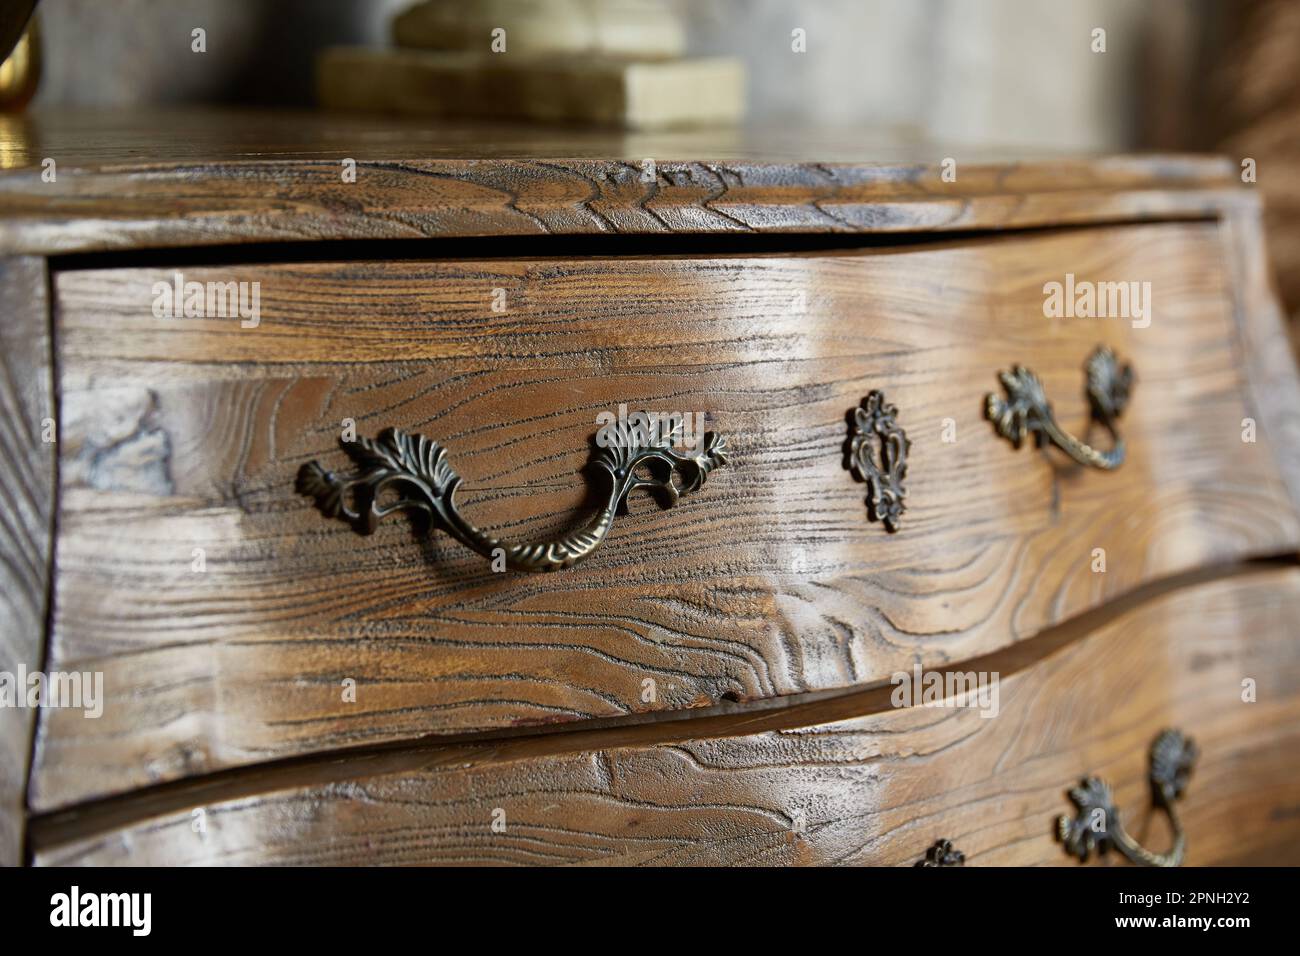 Vintage curved chest of drawers close-up. Forged handles. Stock Photo